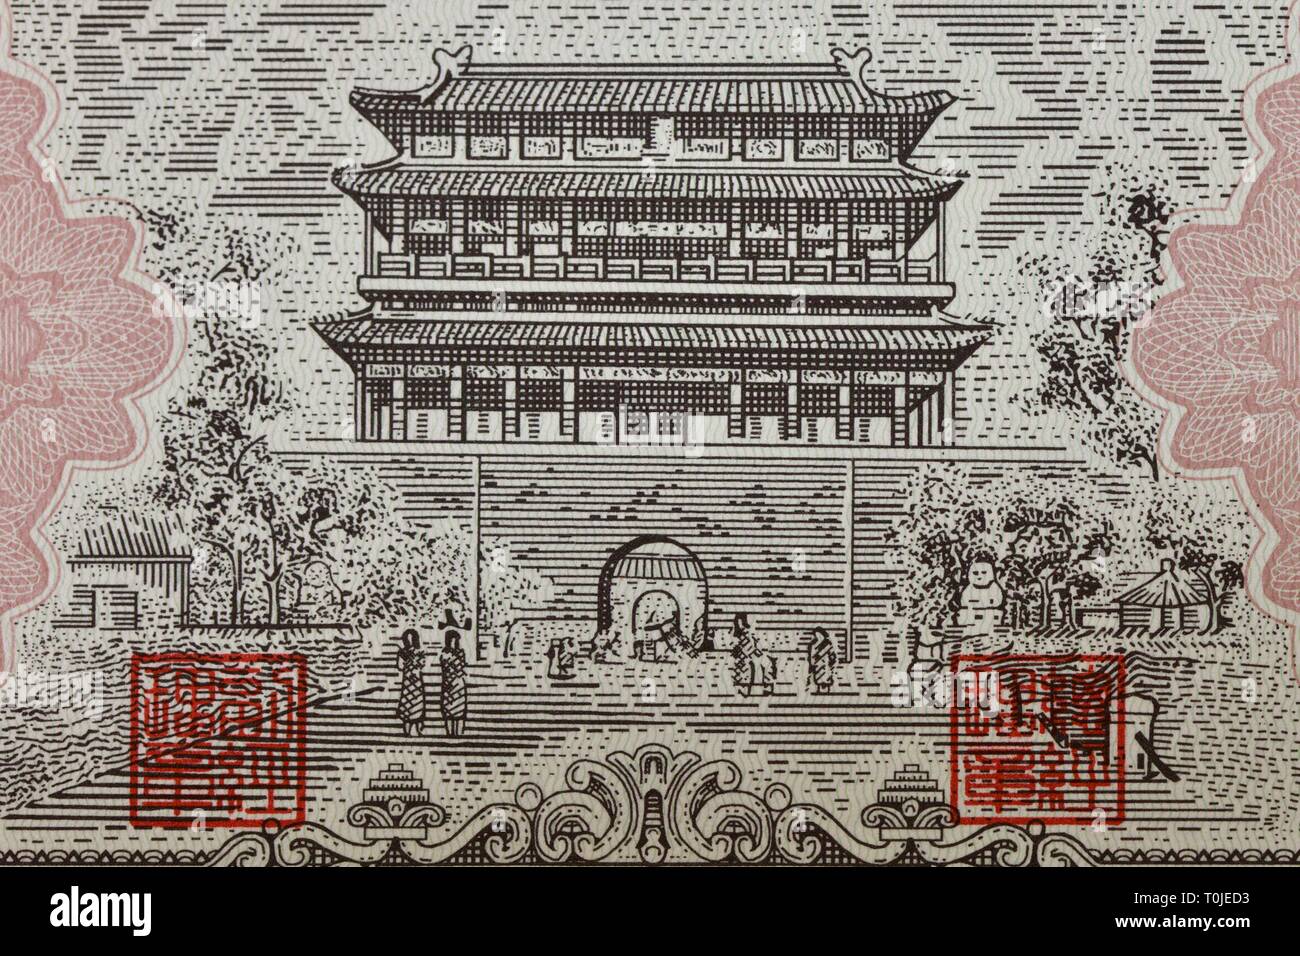 First series of the renminbi ¥500 banknote featuring Zhengyangmen Gate tower in Beijing Stock Photo